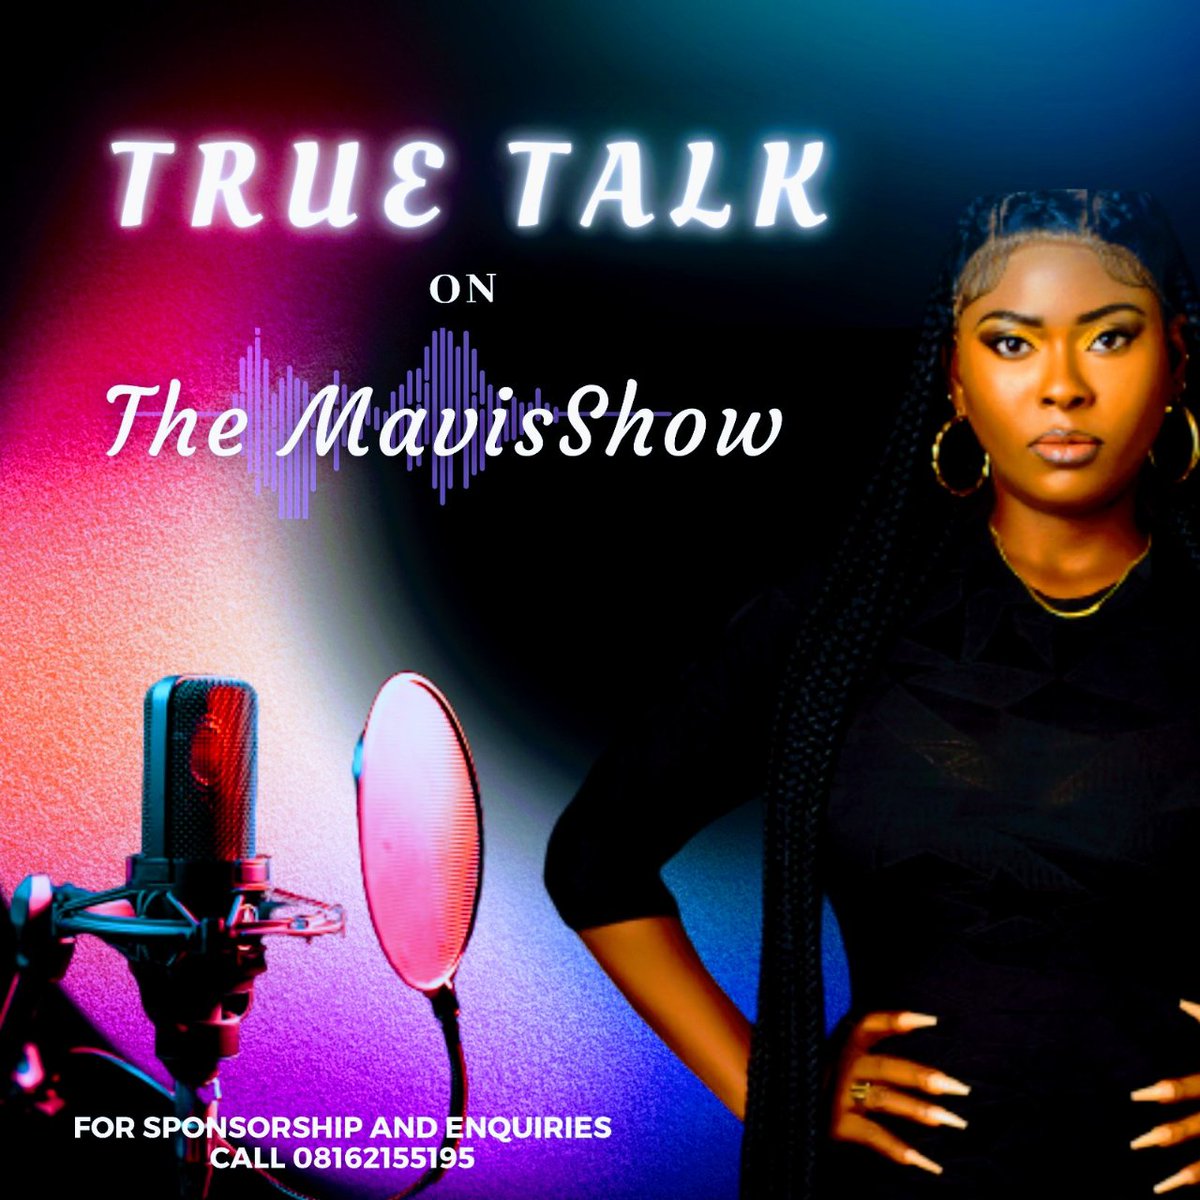 This is going to be the most important talk show in a few months.

#TheMavisShow #TruthTalk